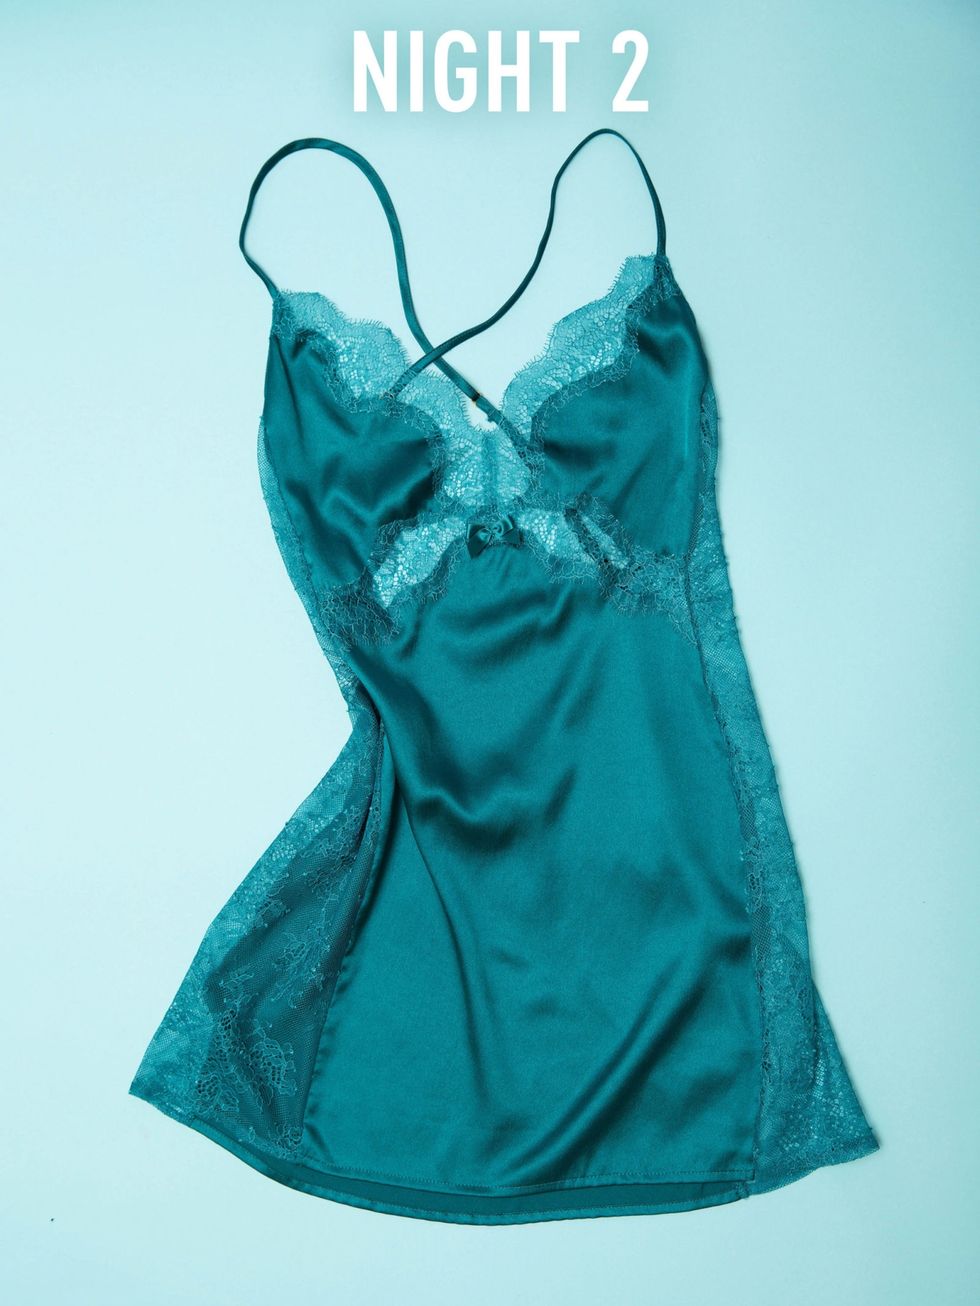 I wore lingerie to bed for seven nights - night two